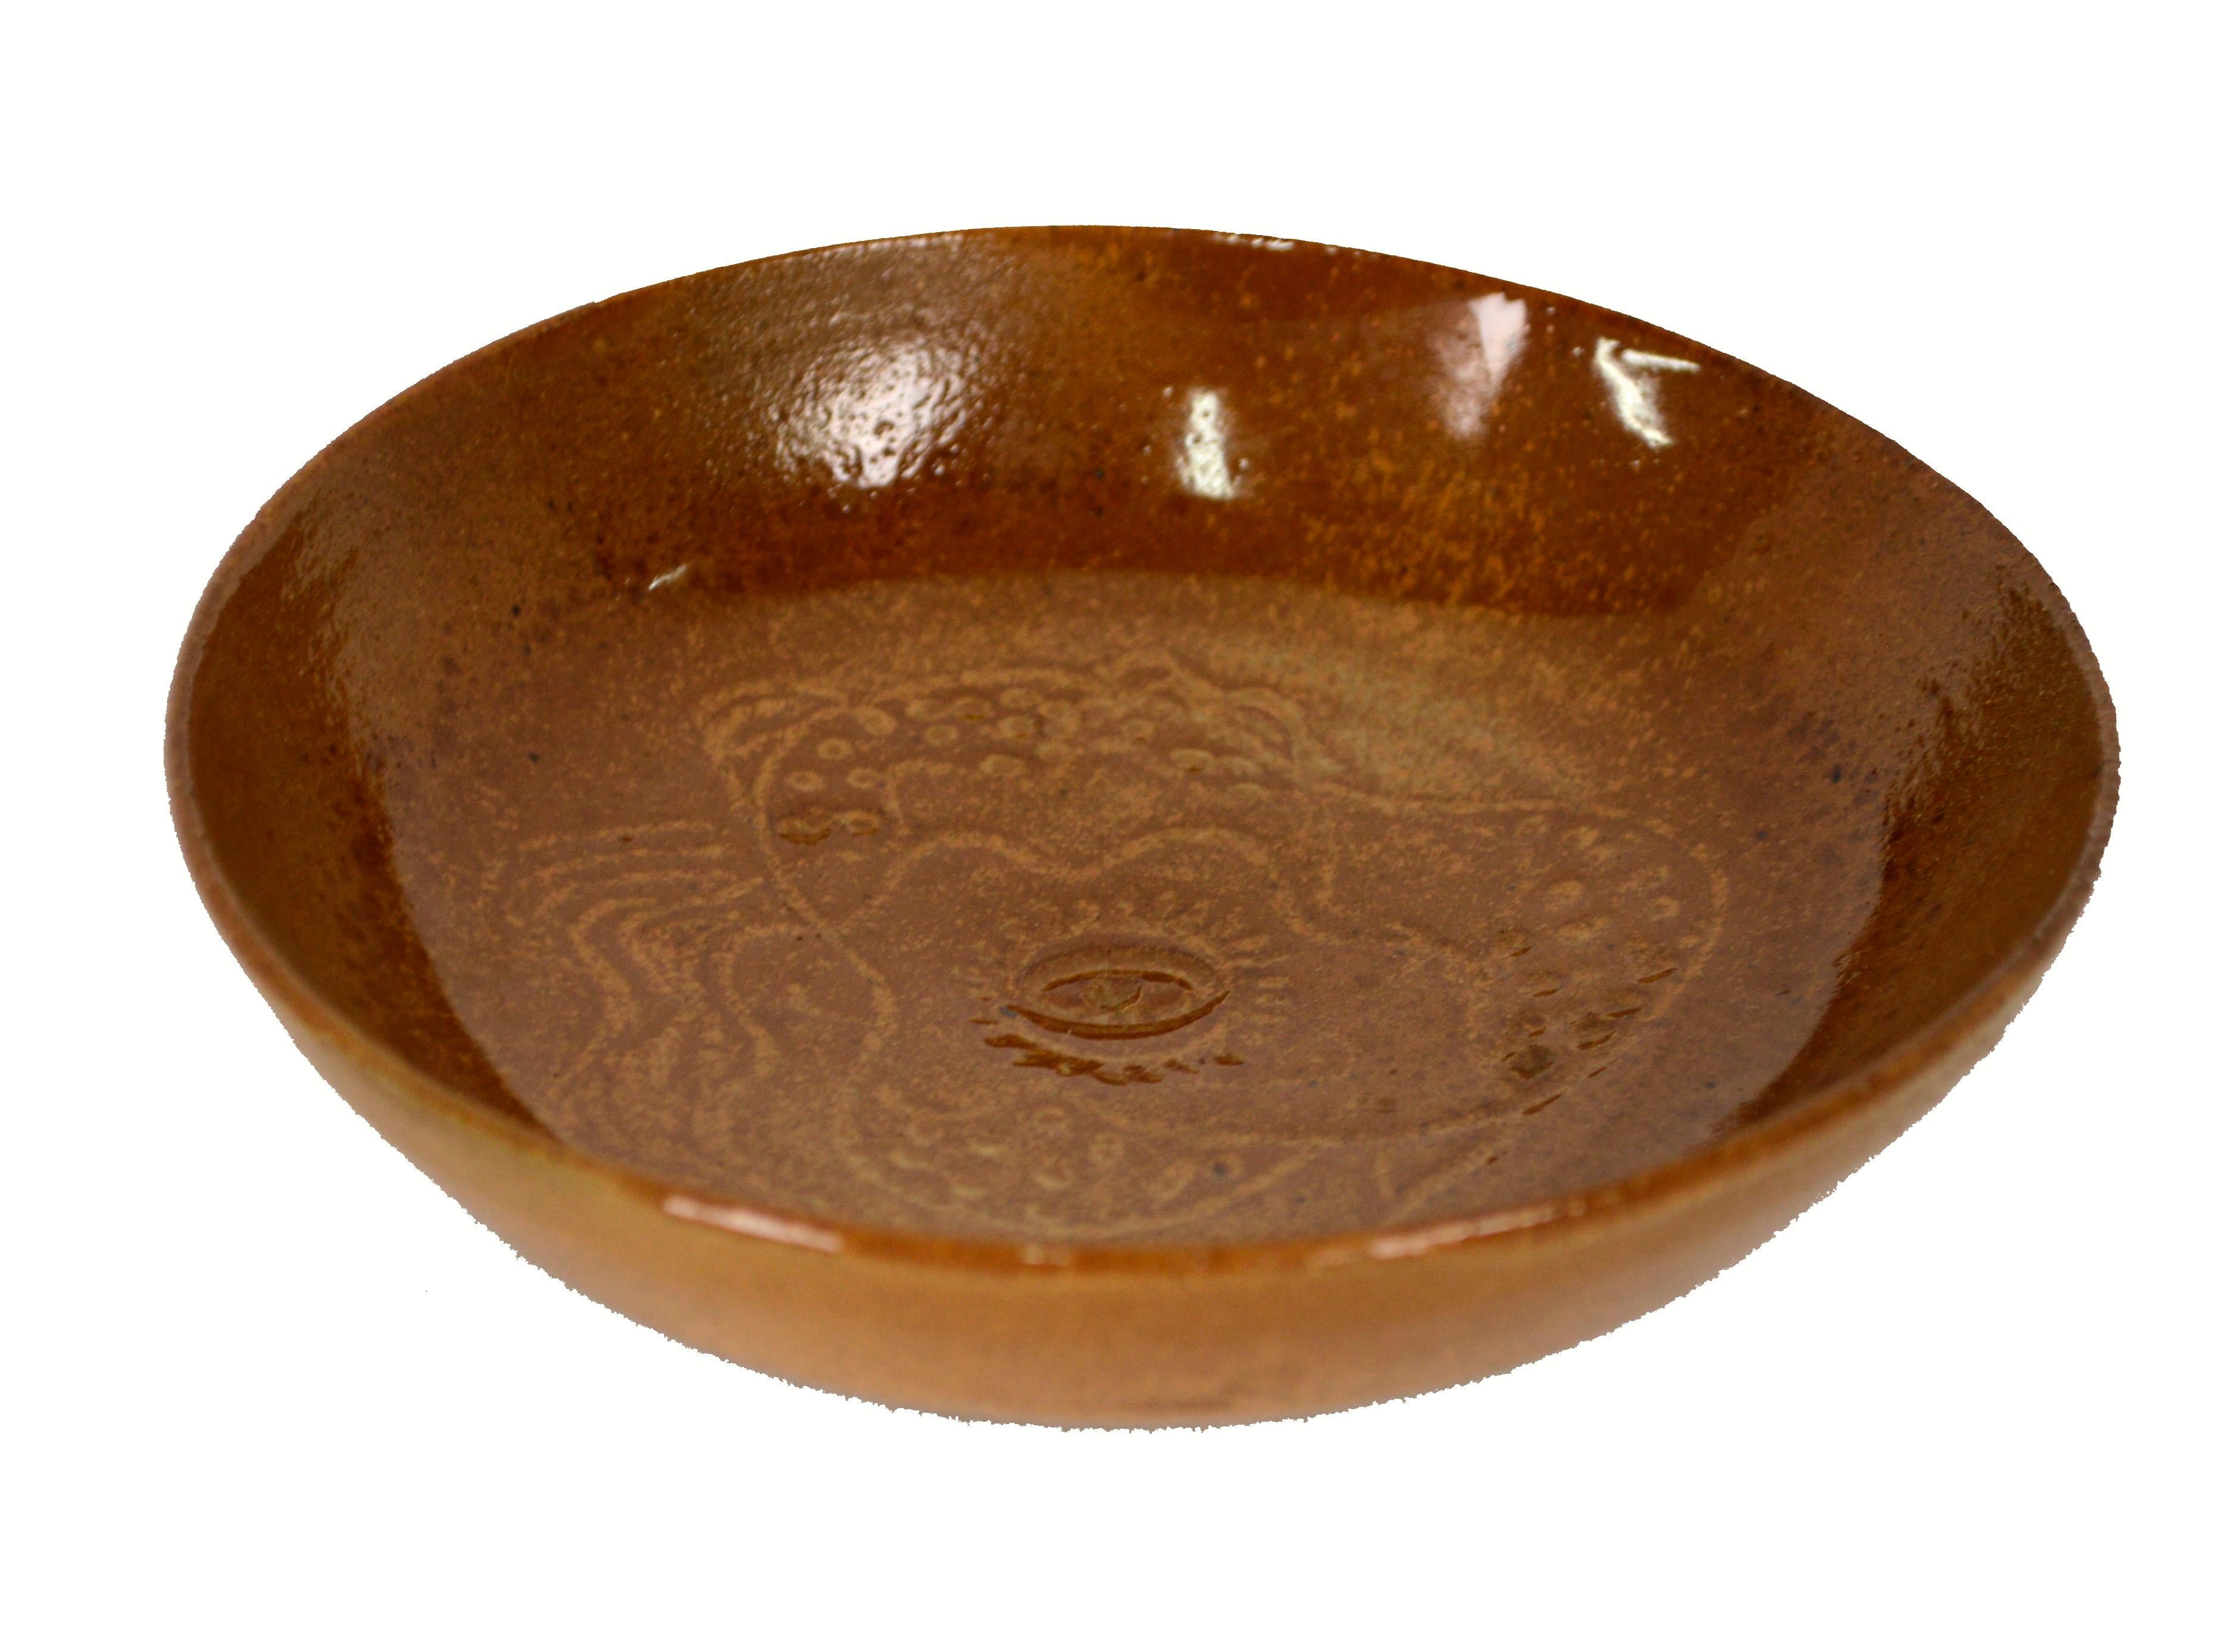 Unique small hand-made terracotta bowl, incised with a decorative all seeing eye pattern, by California potter Bruce Carlton Anderson (American, 1915-1986). This earthy piece is in the style of Marguerite Wildenhain of the Pond Farm, where Anderson